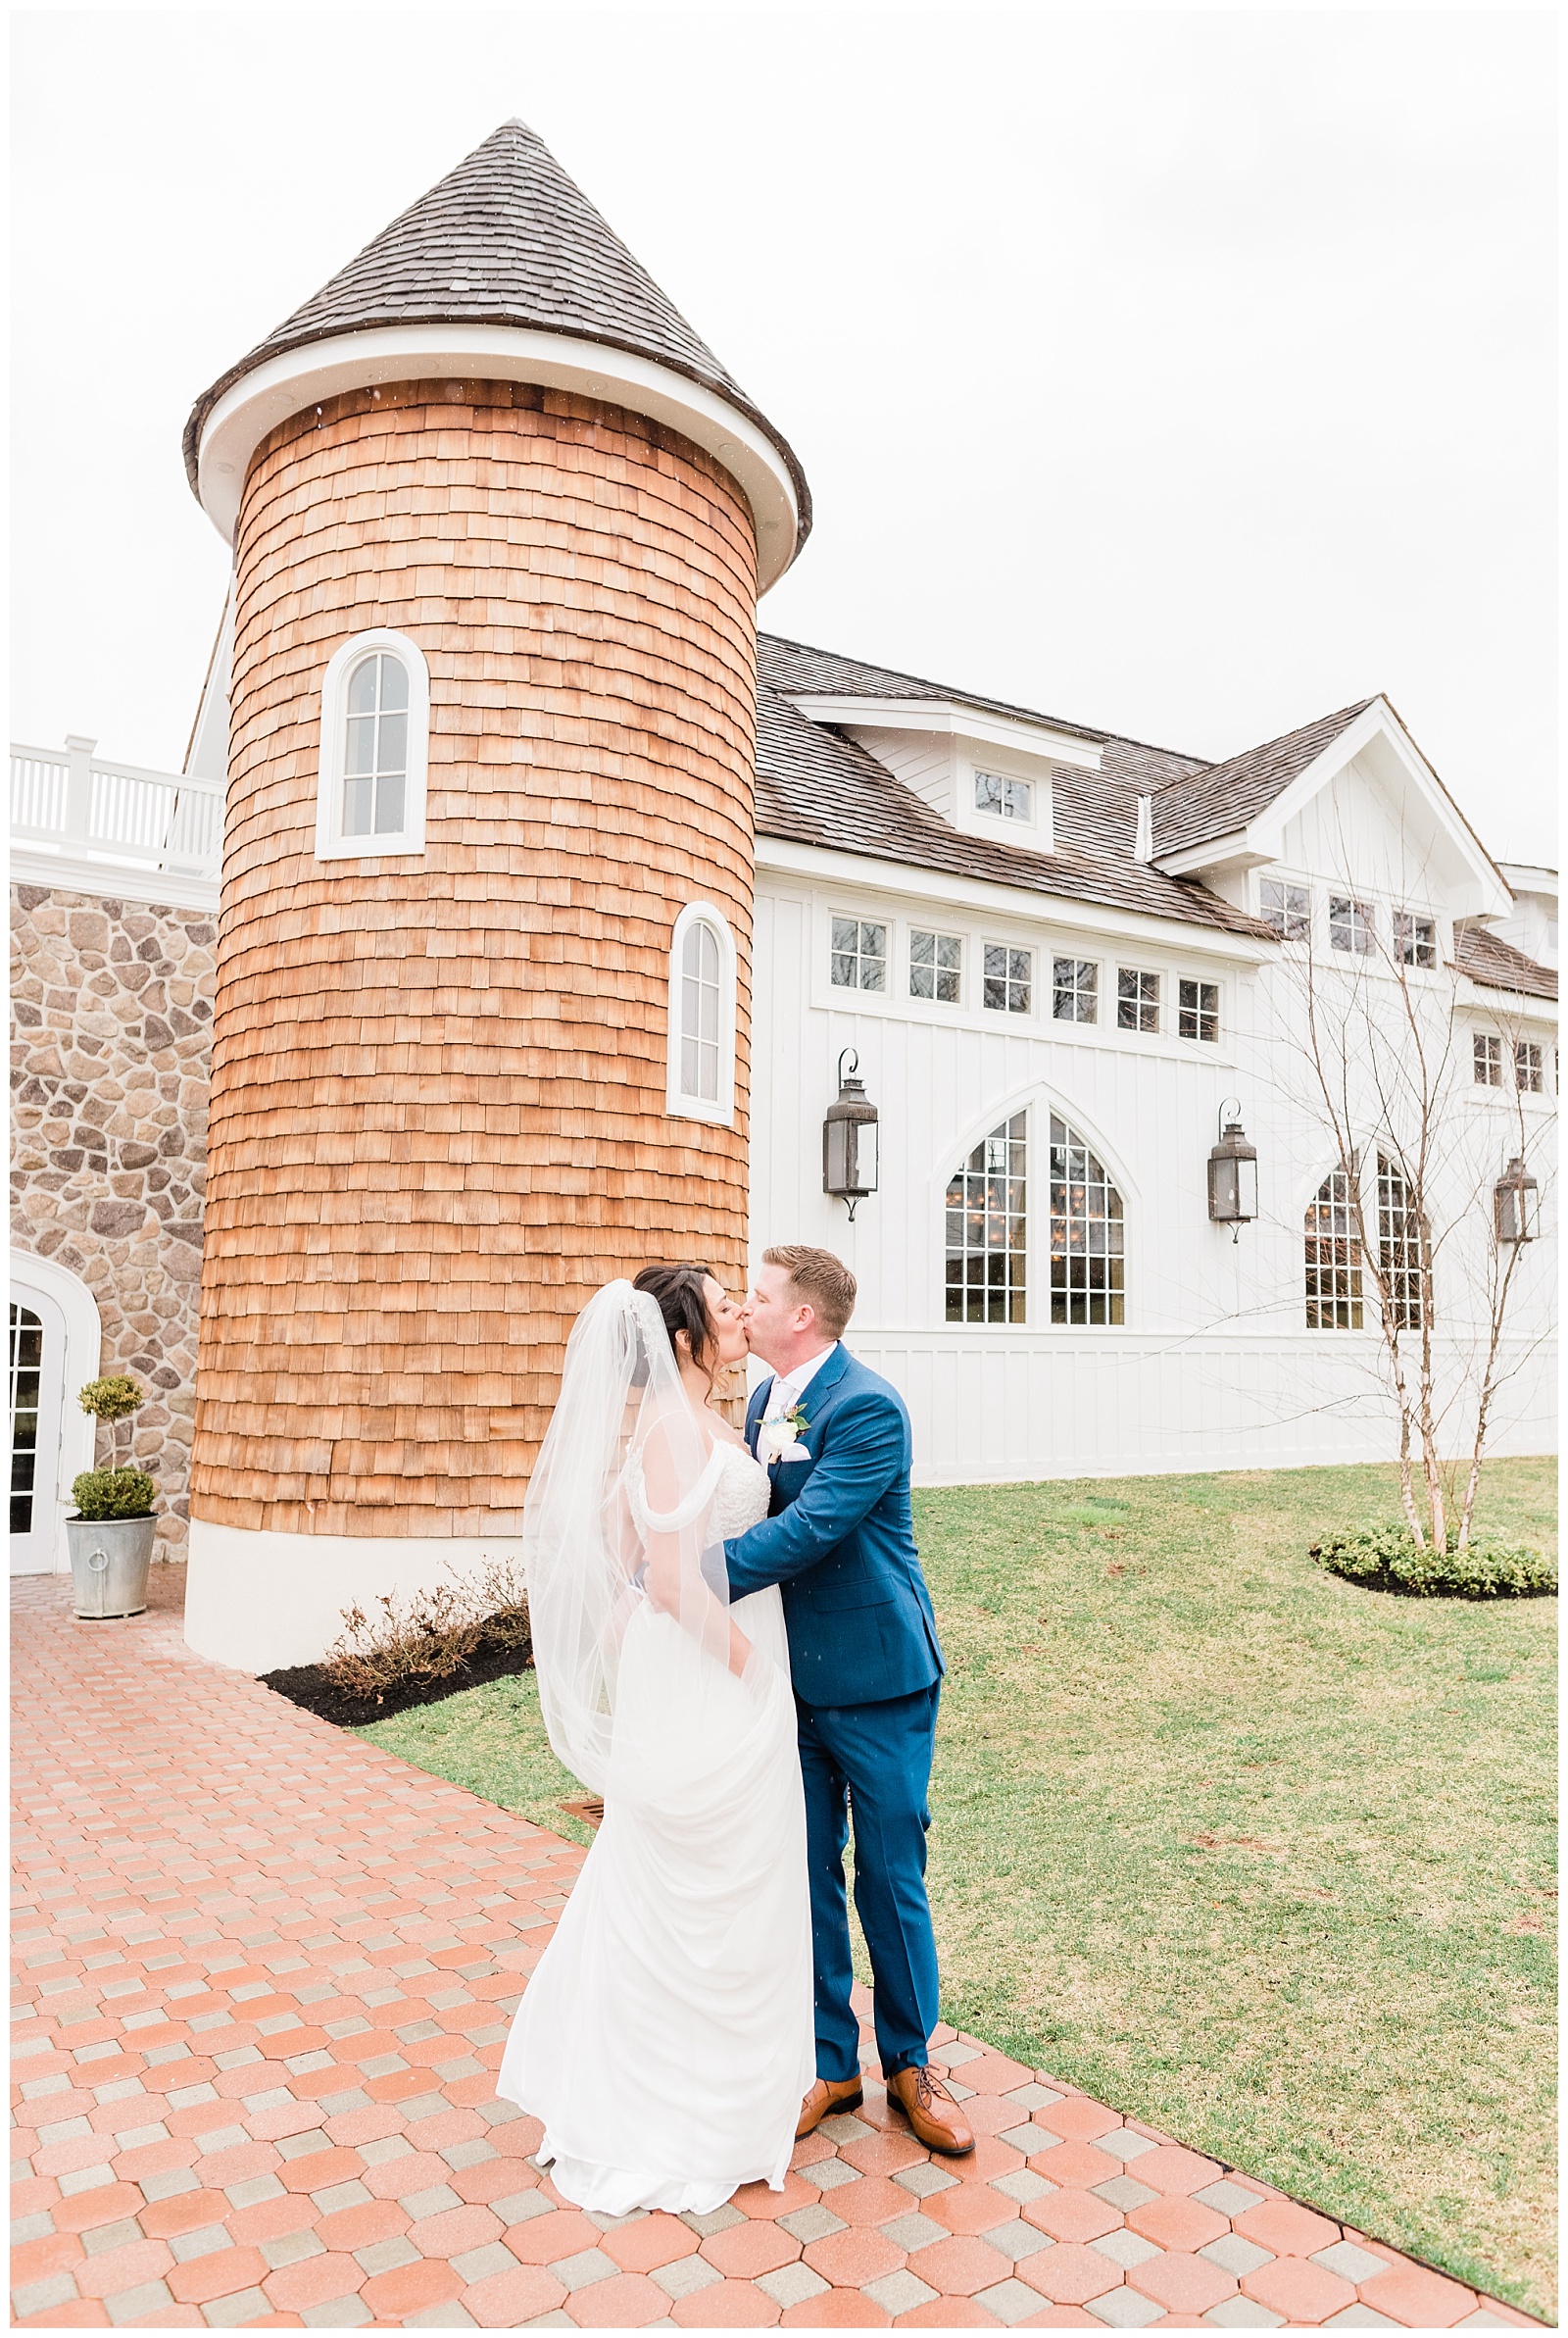 Bride and groom kiss outside the Coach House at the Ryland Inn, Whitehouse Station, NJ.